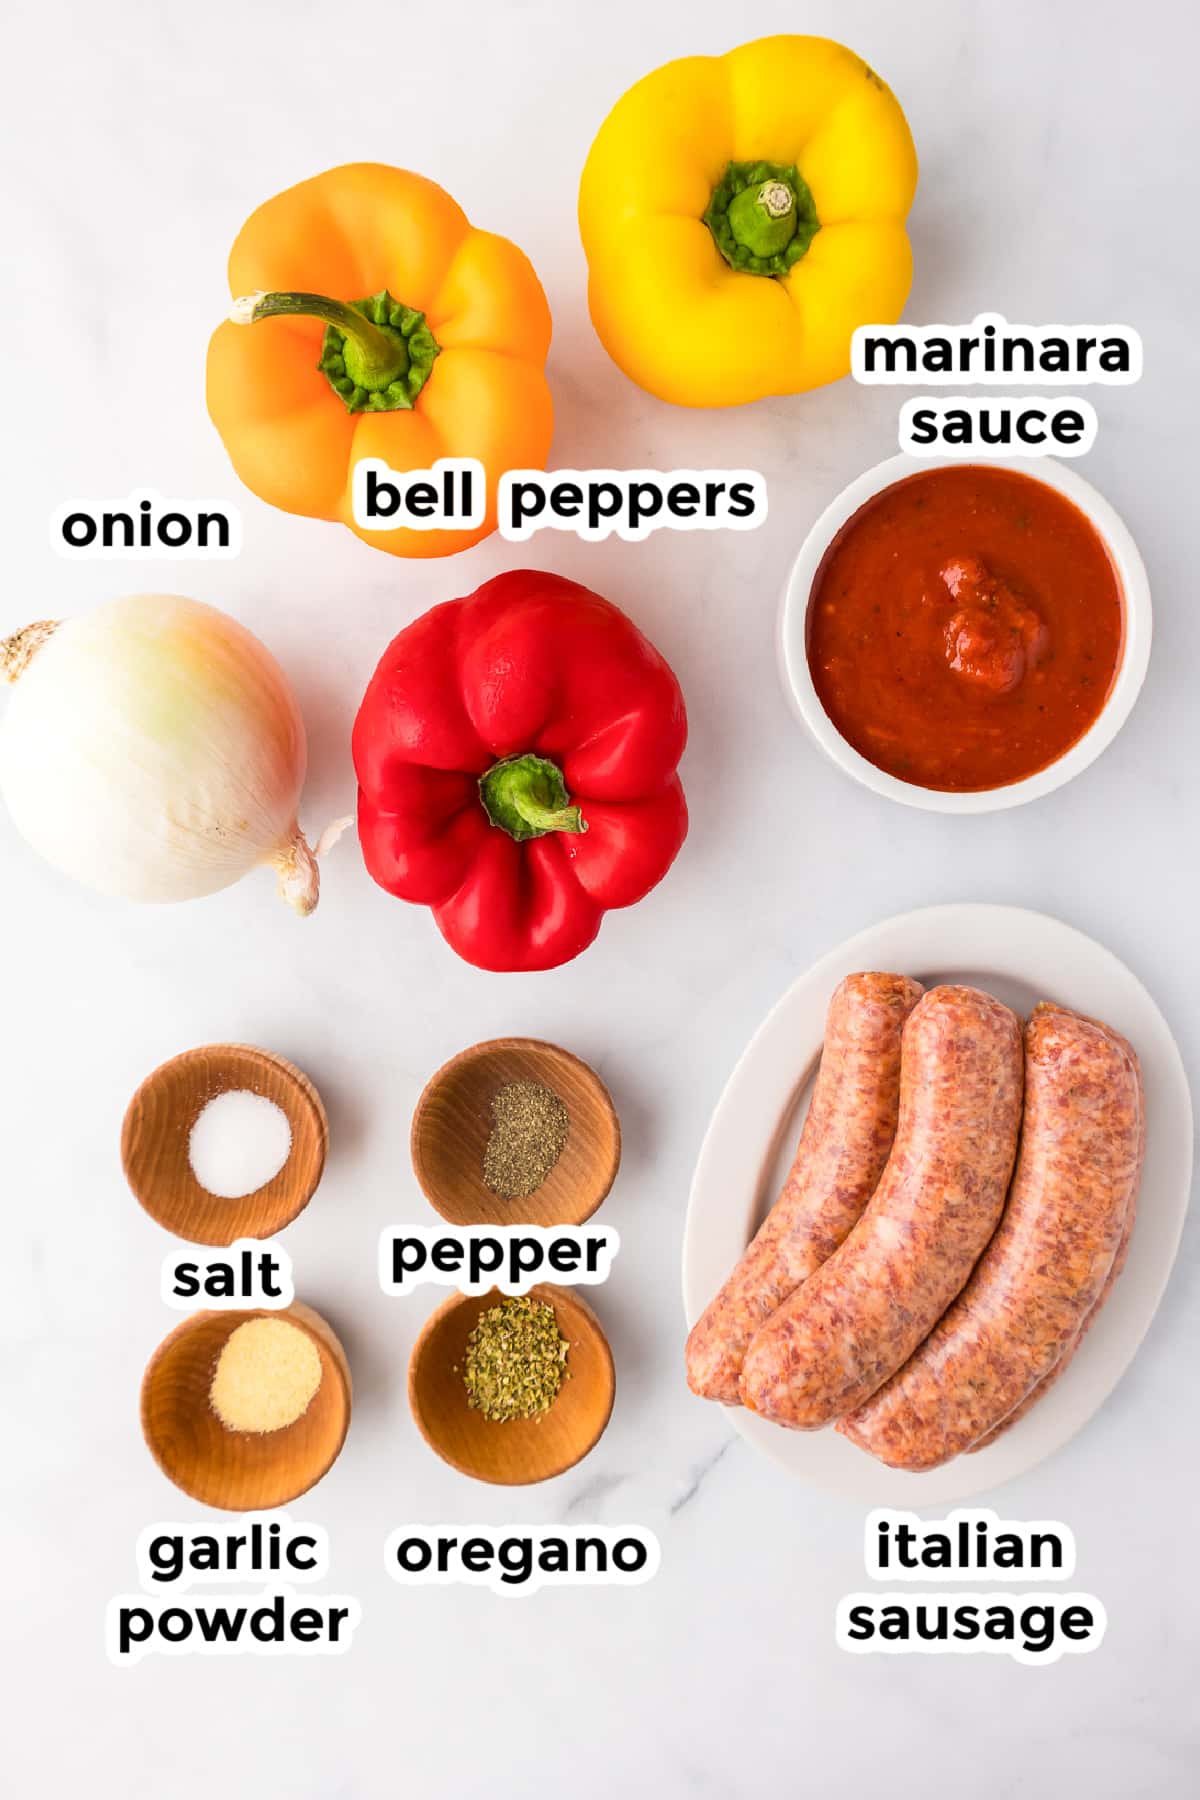 Ingredients for sausage peppers and onions in bowls on a kitchen counter with text labels.